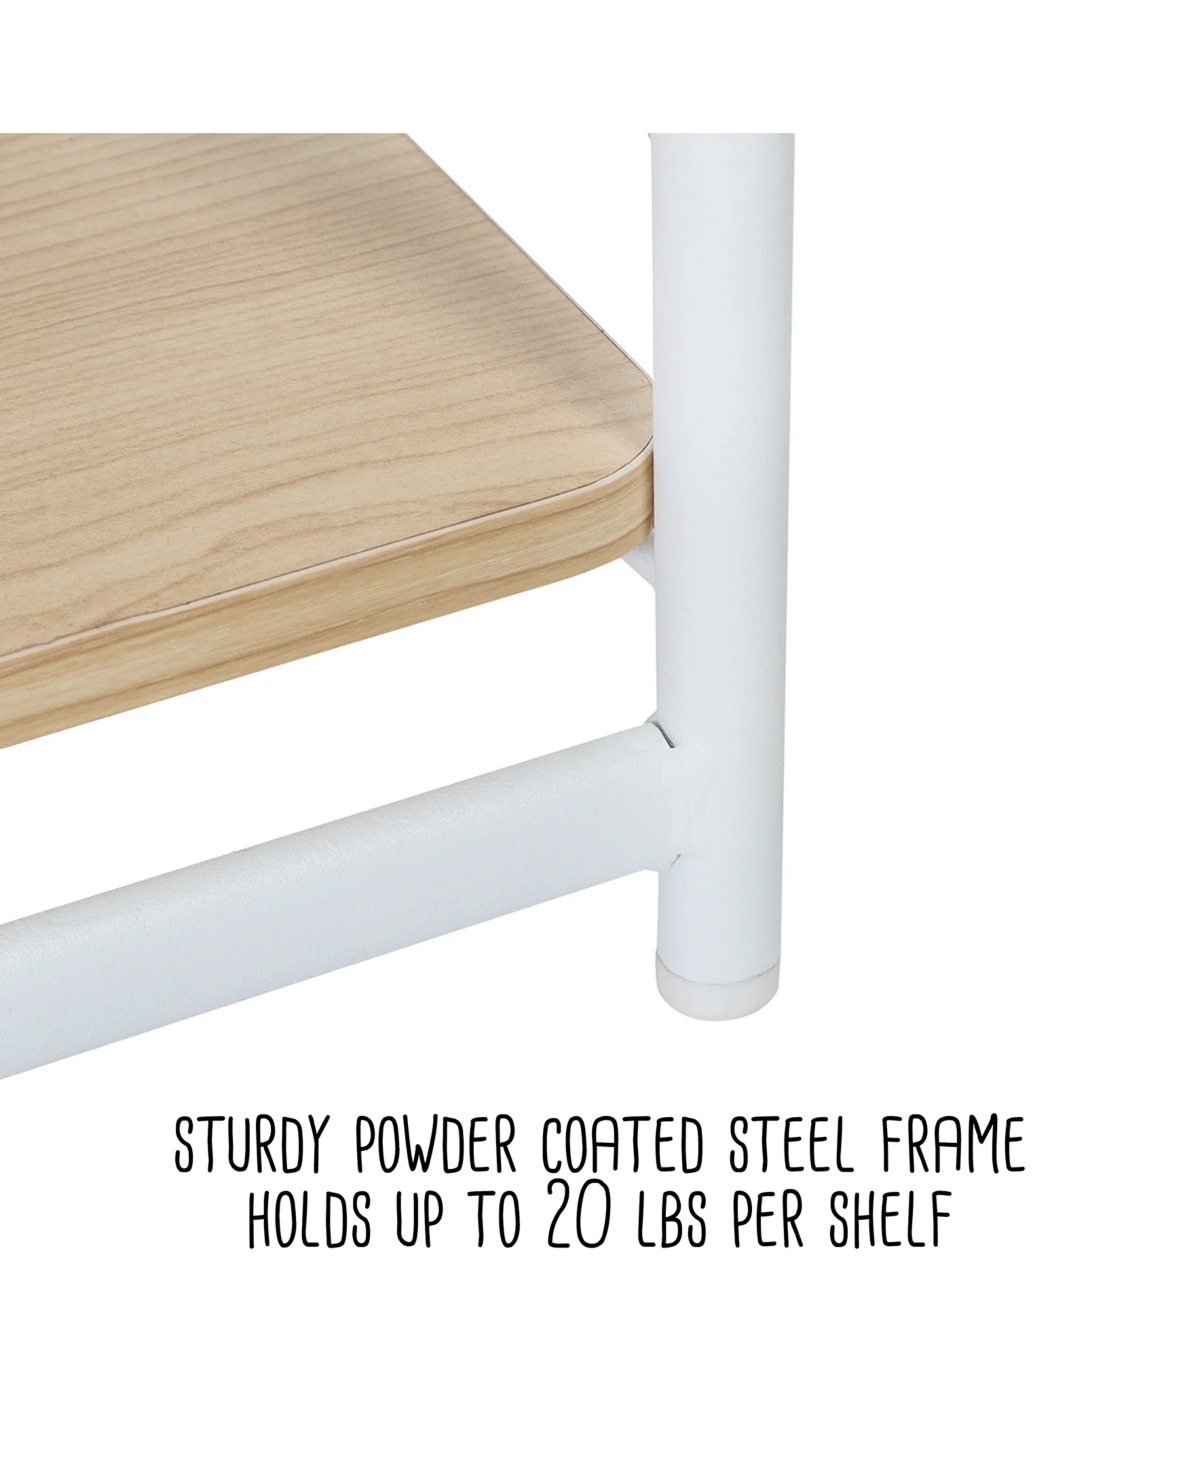 Shop Honey Can Do 3-tier Wood & Metal Small Shelf In White